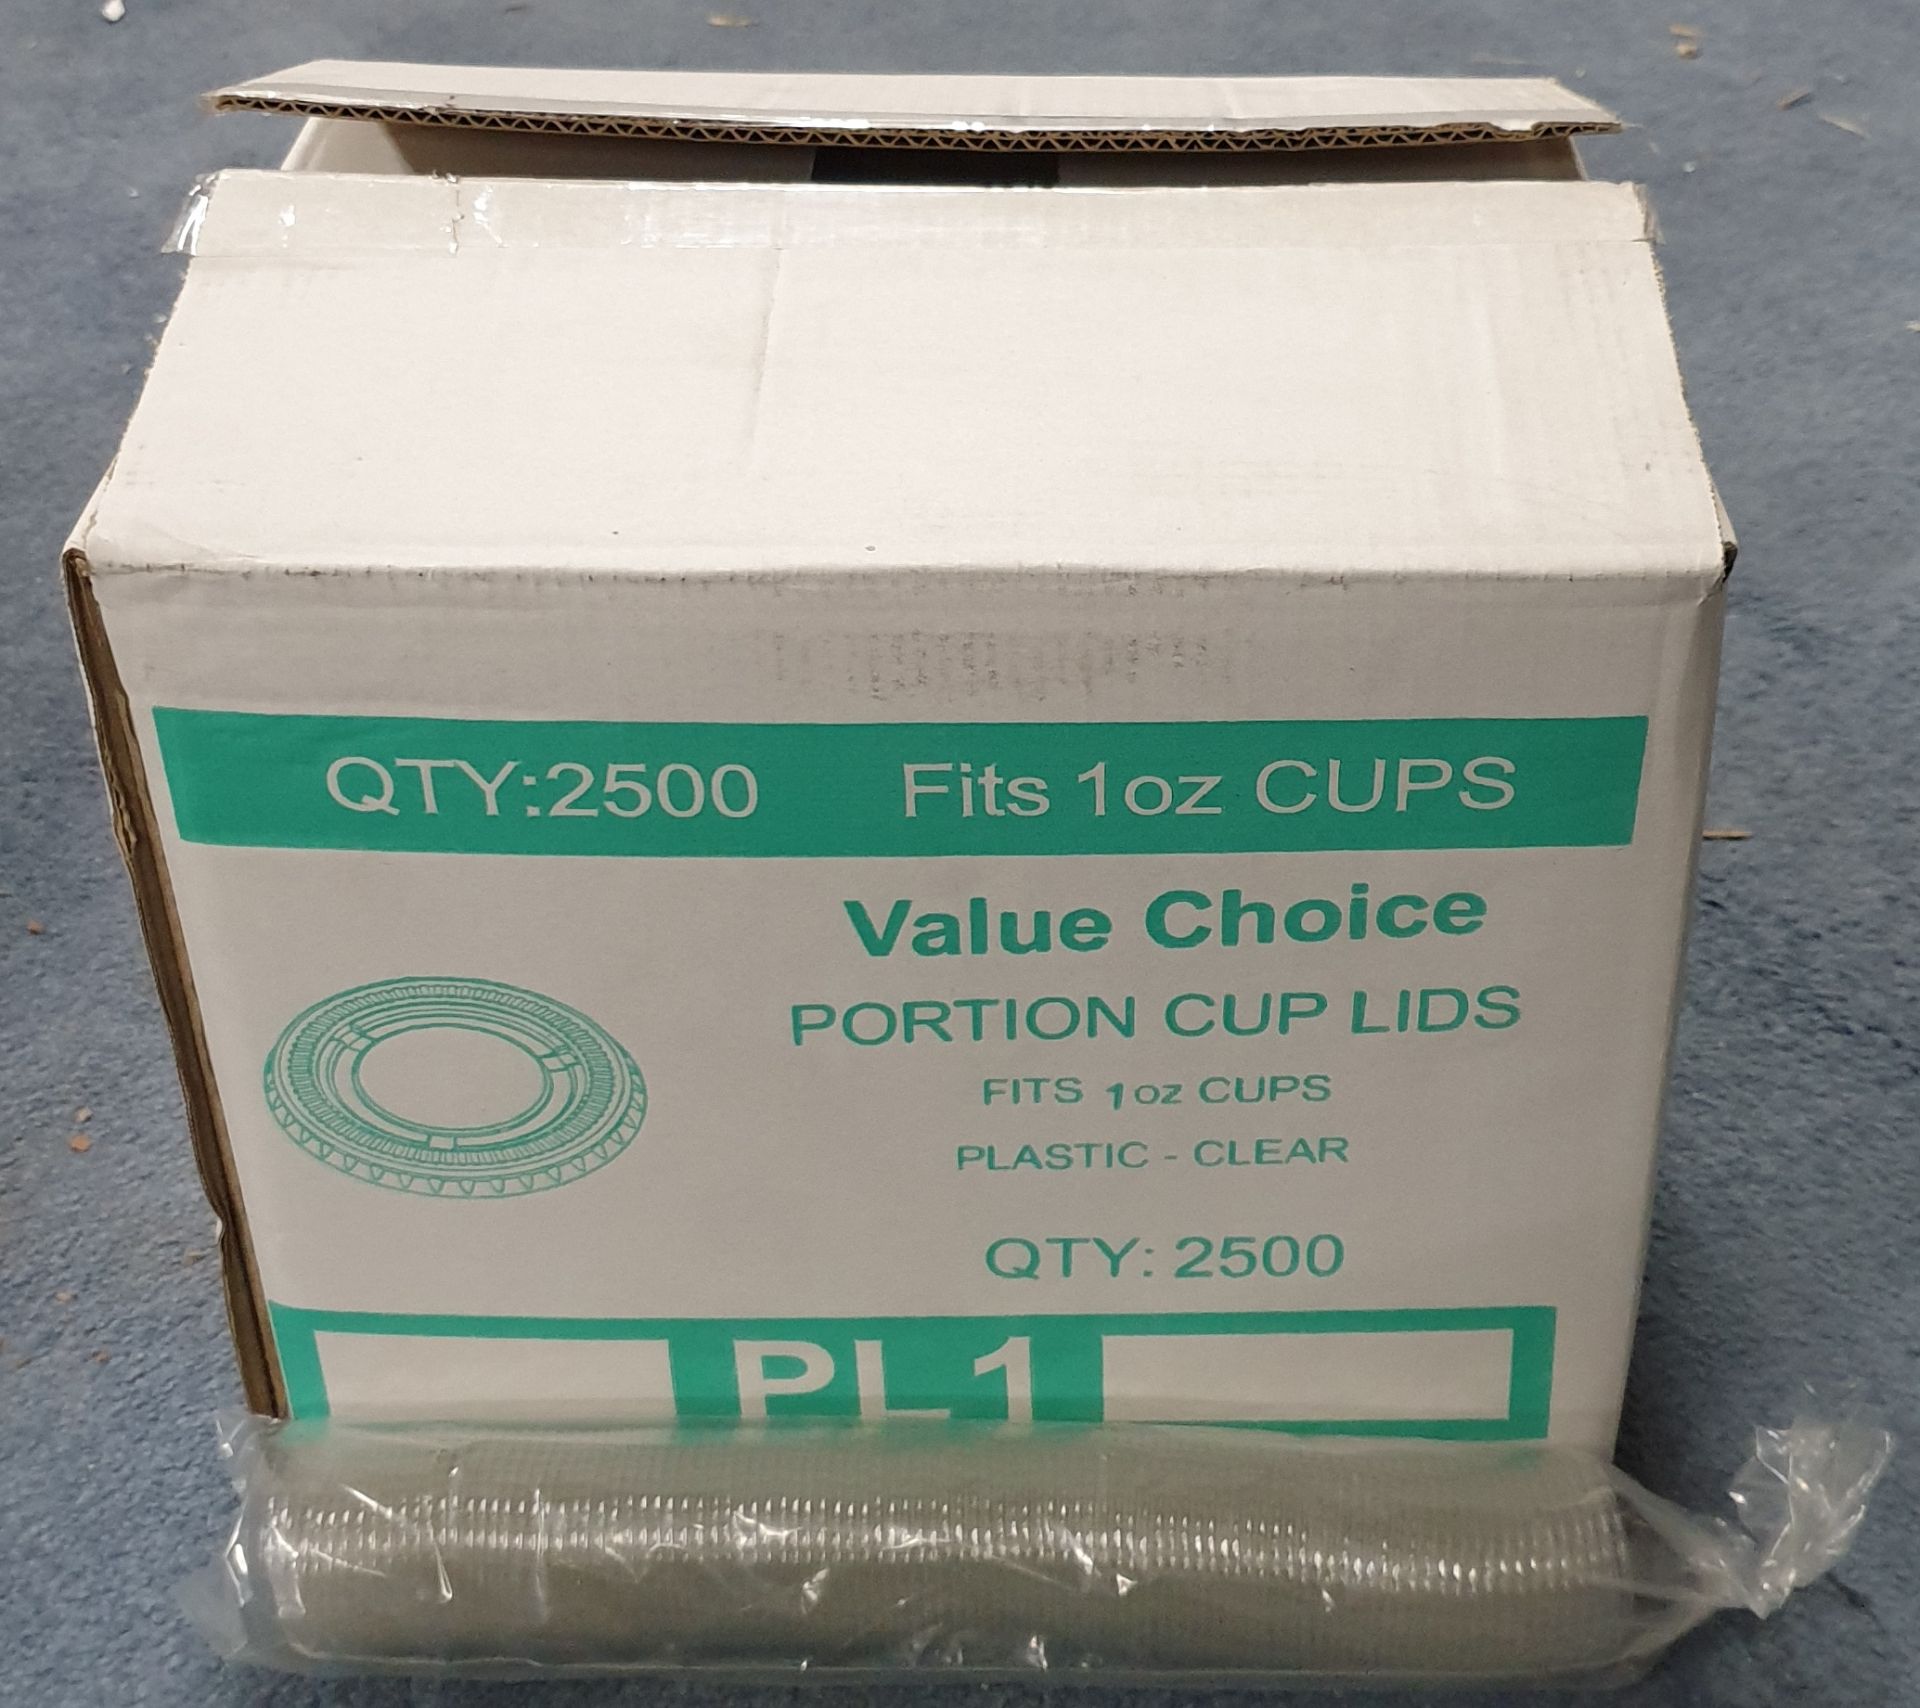 10 x Box of Portion Cups & 10 Box of Lids by Value Choice - Image 4 of 4